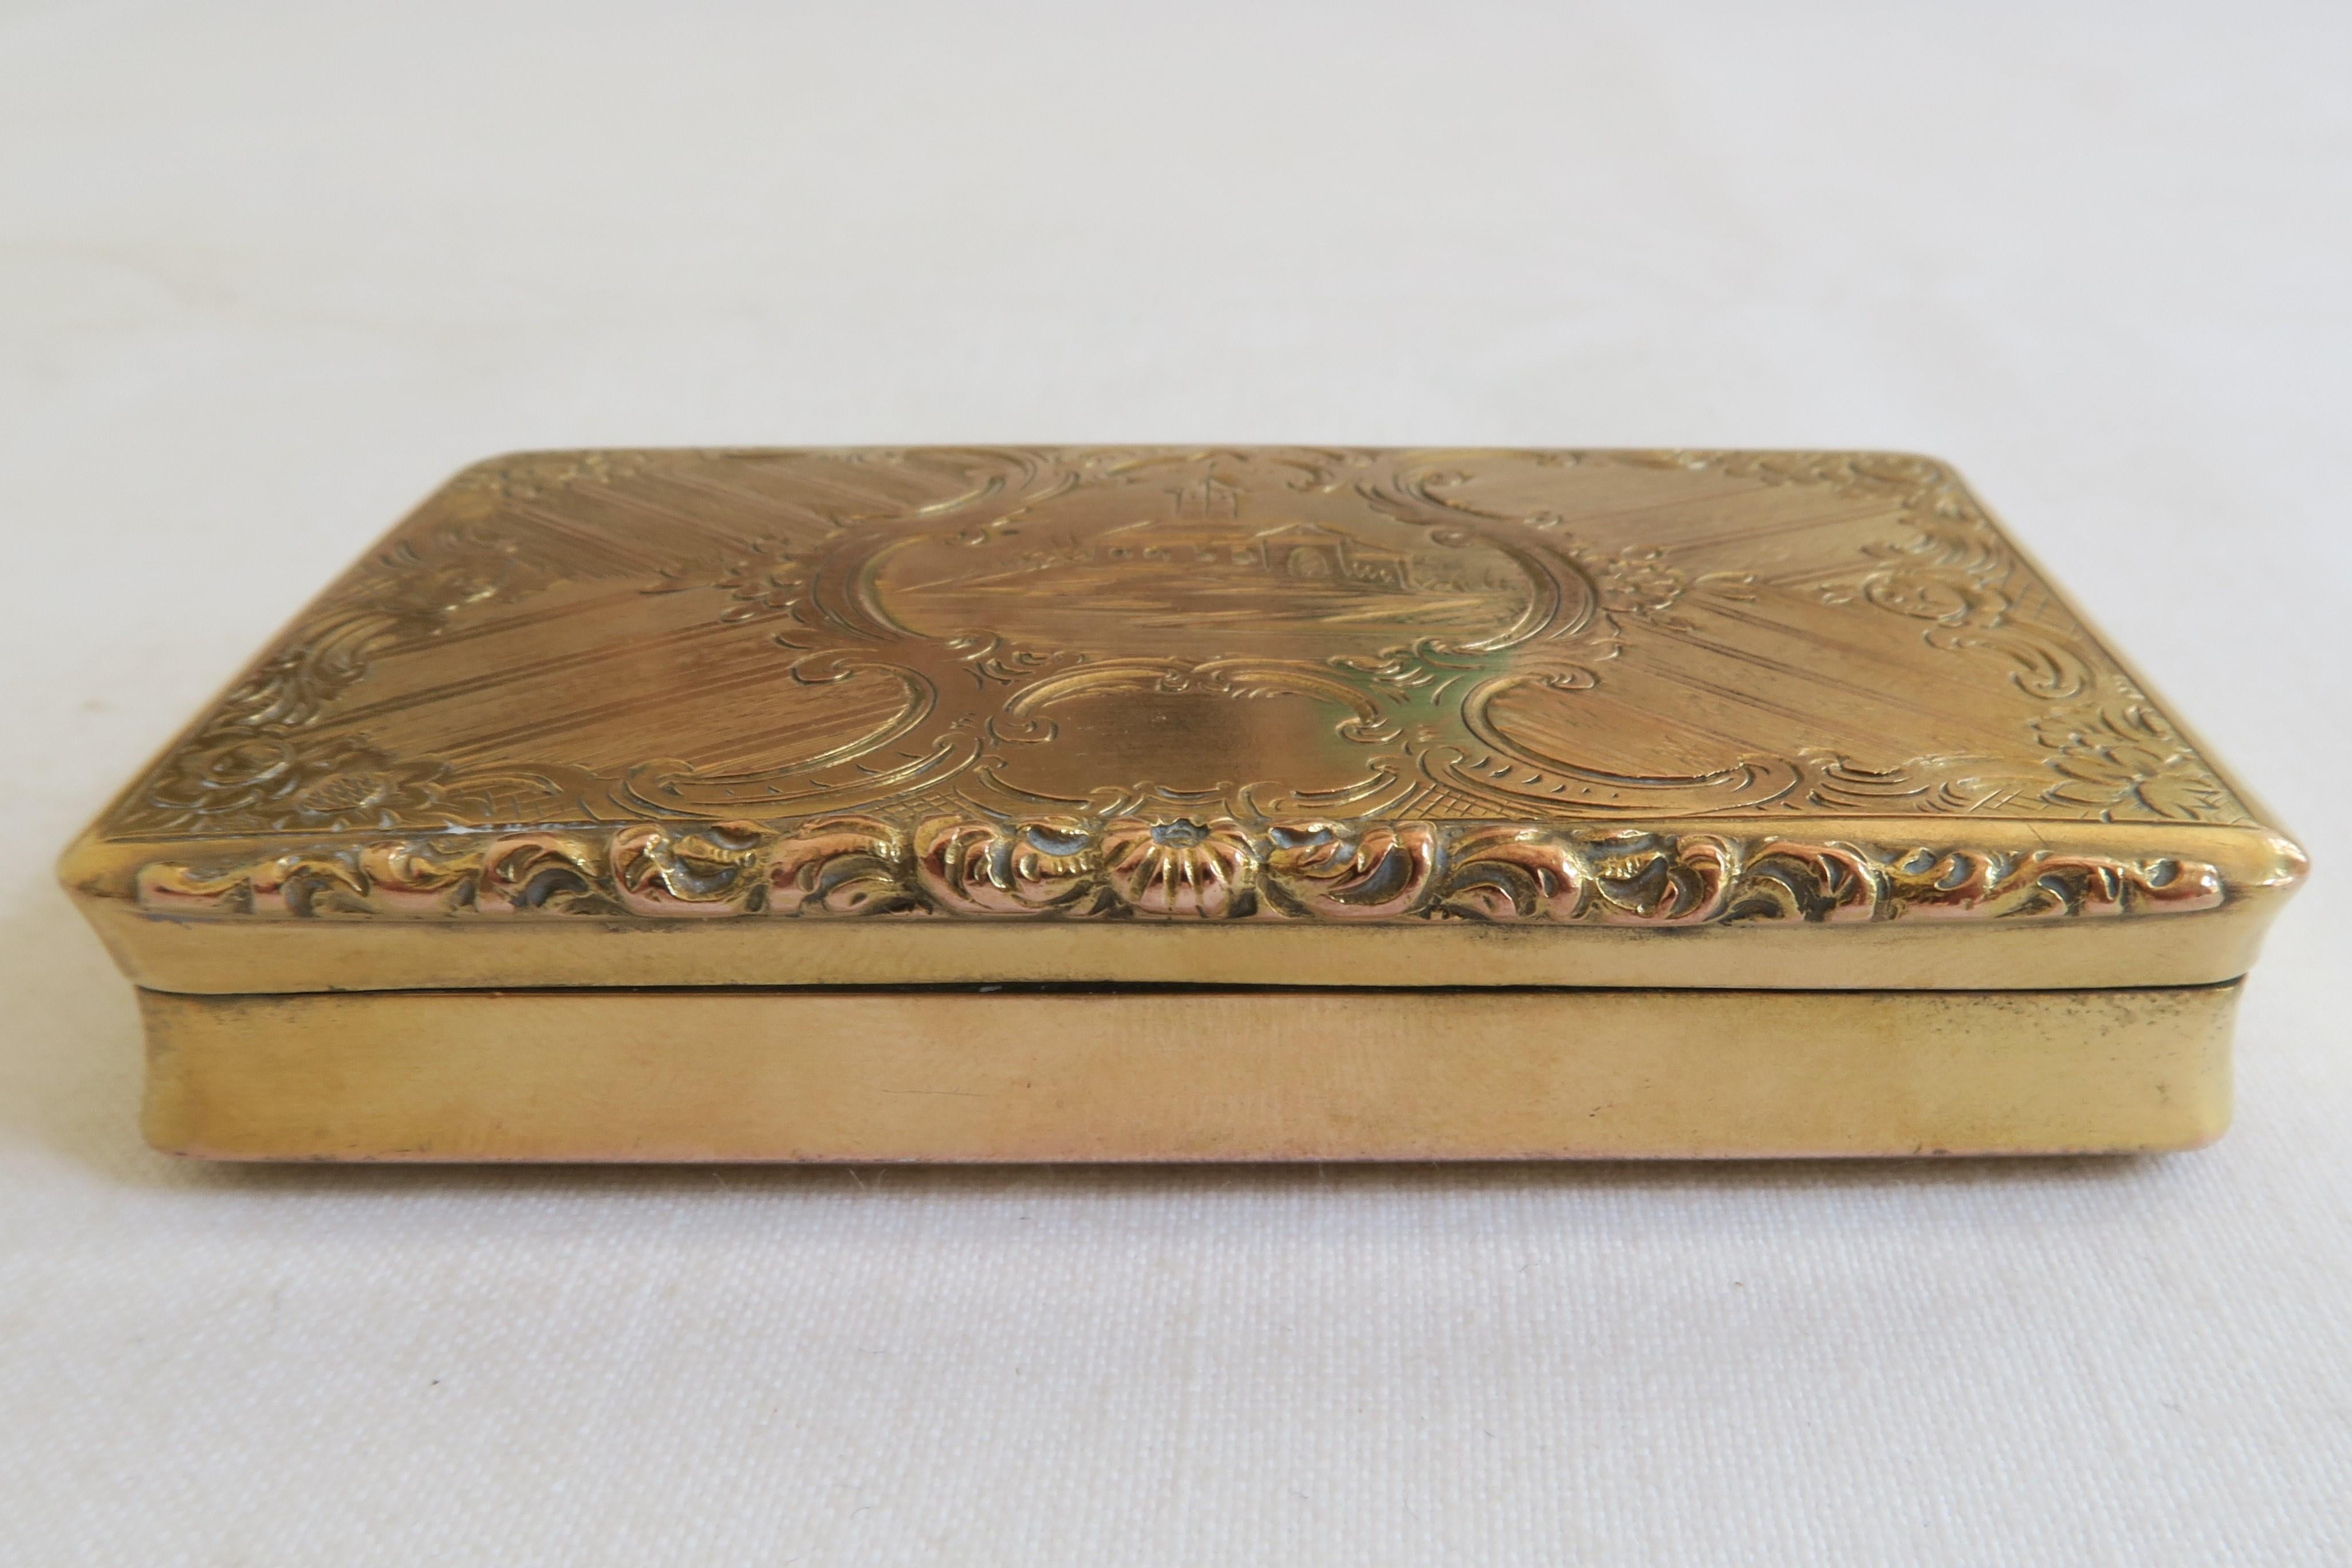 This beautiful snuff box is made from gold-plated sterling silver. The lid is embellished with a nice little graphic of a church surrounded by generous floral motives and ornament. Its bottom is a little more humble, covered in a graphic pattern.